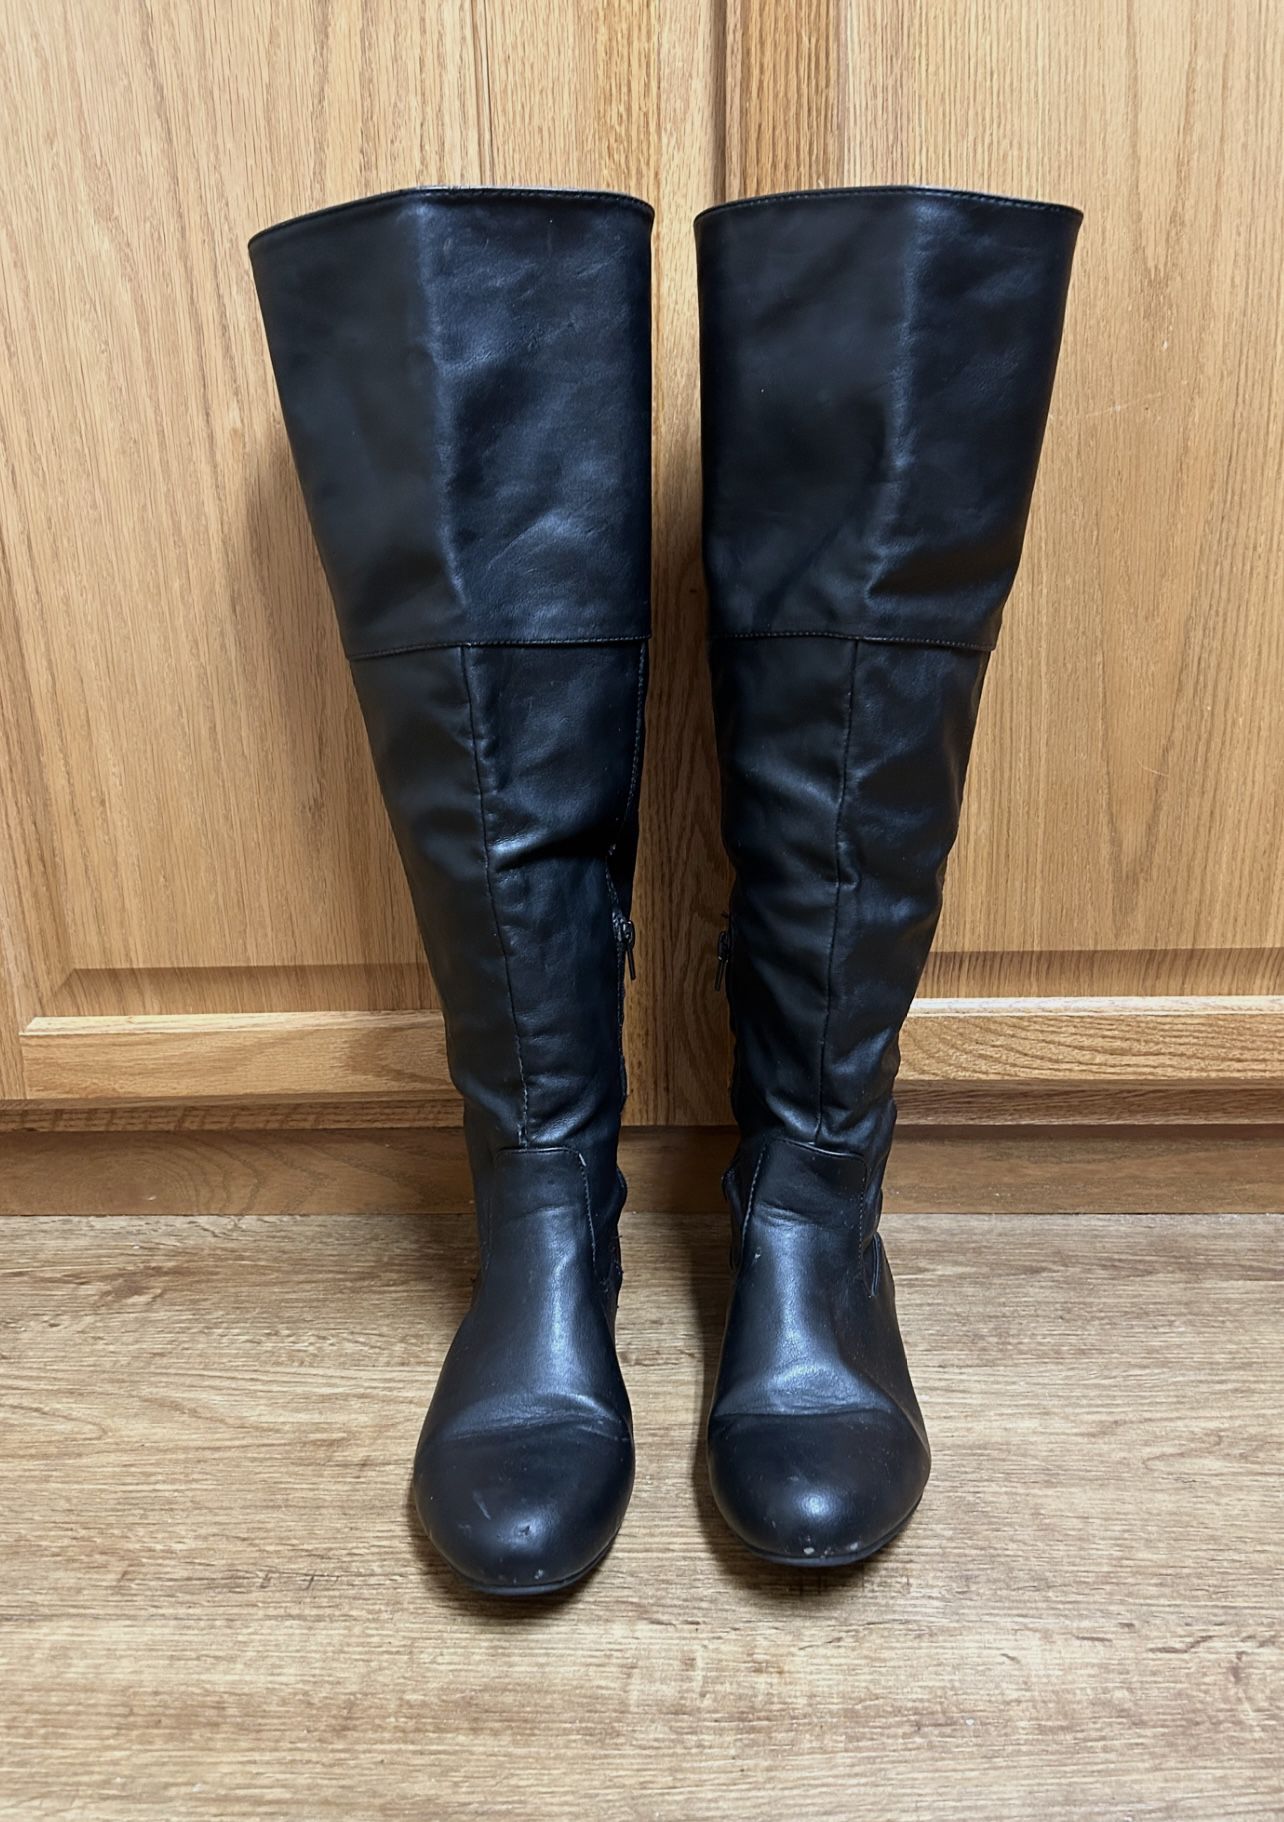 Lilly16 Thigh High Faux Leather Black Boots/Size 6.5-7